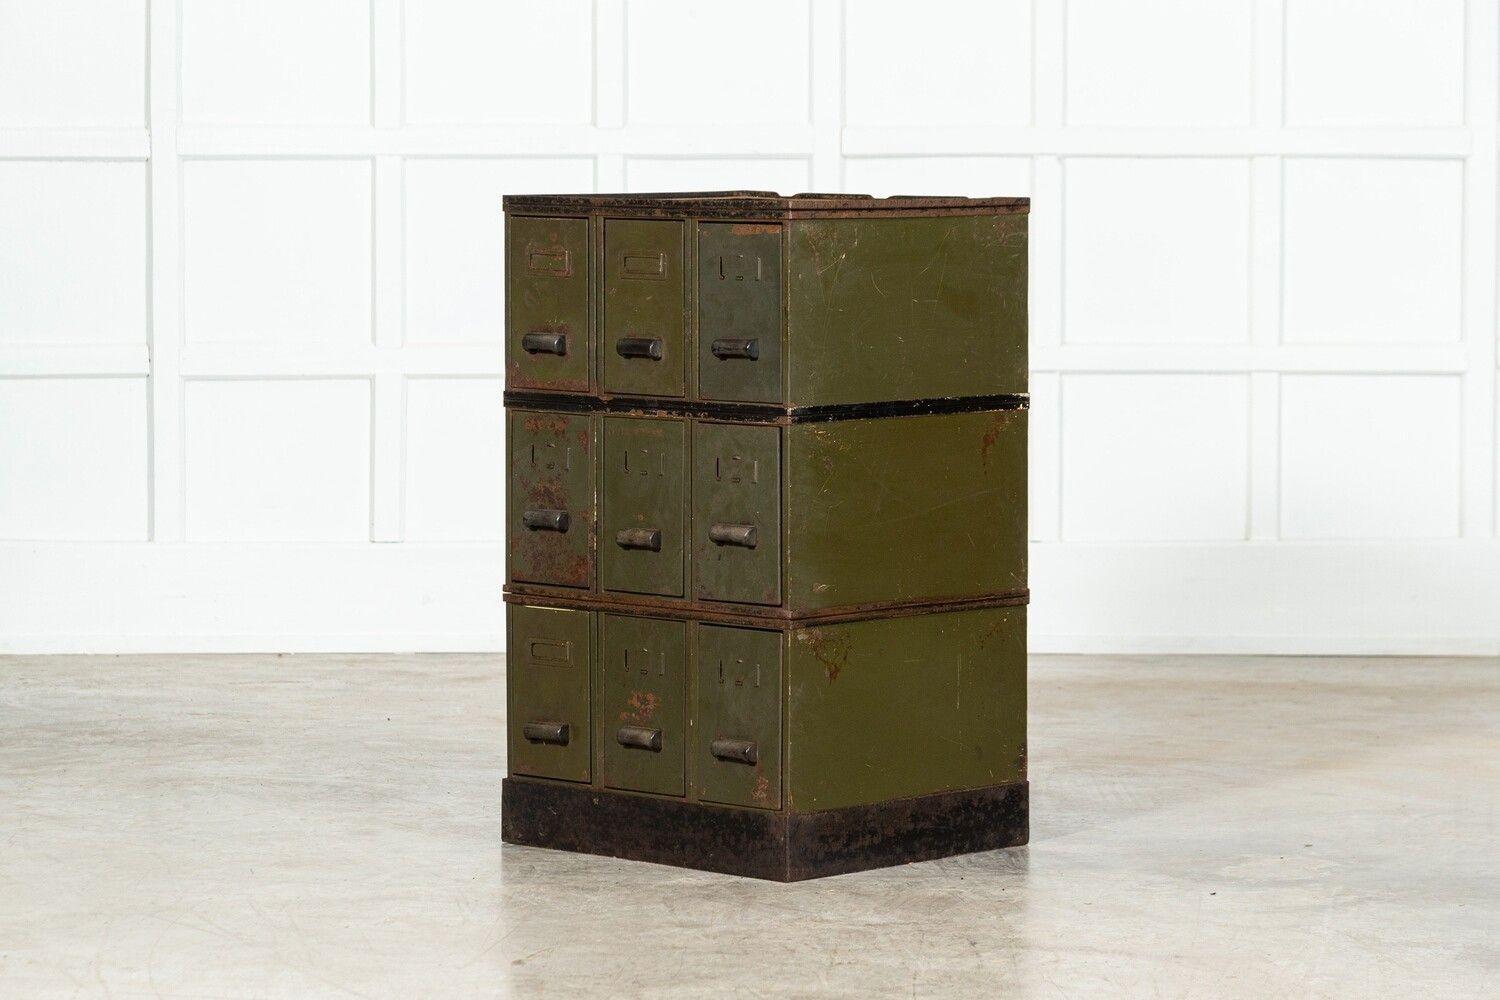 circa 1940
English sectional Filing Chest
(Would make a good wine rack cabinet)
sku 219
W55 x D48 x H90 cm
Weight 75 Kg